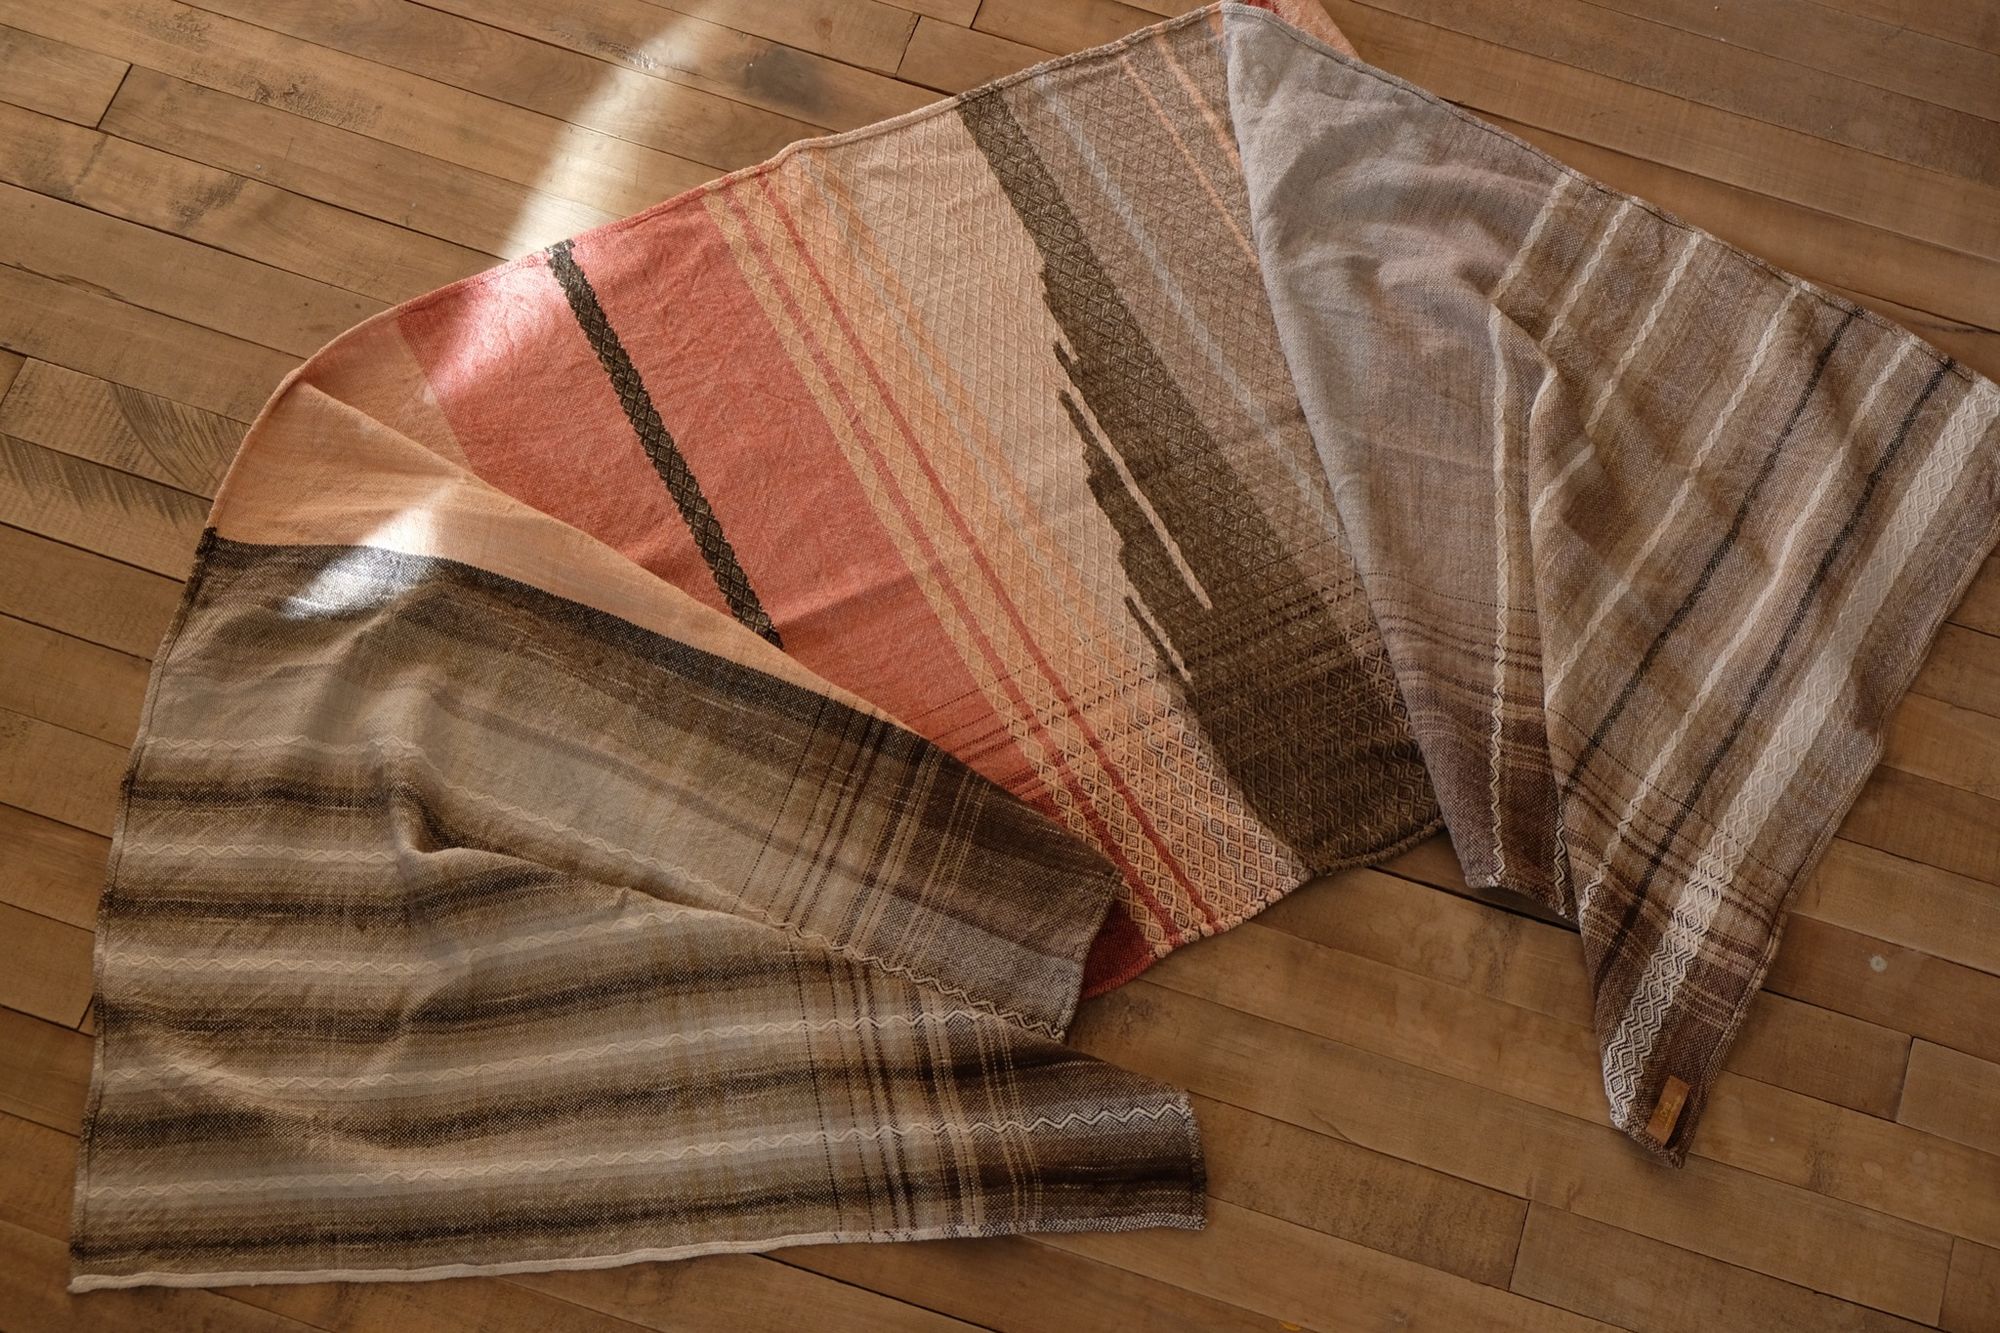 Handwoven shawl in brown, tan and salmon pink colors laying on a wood floor. 